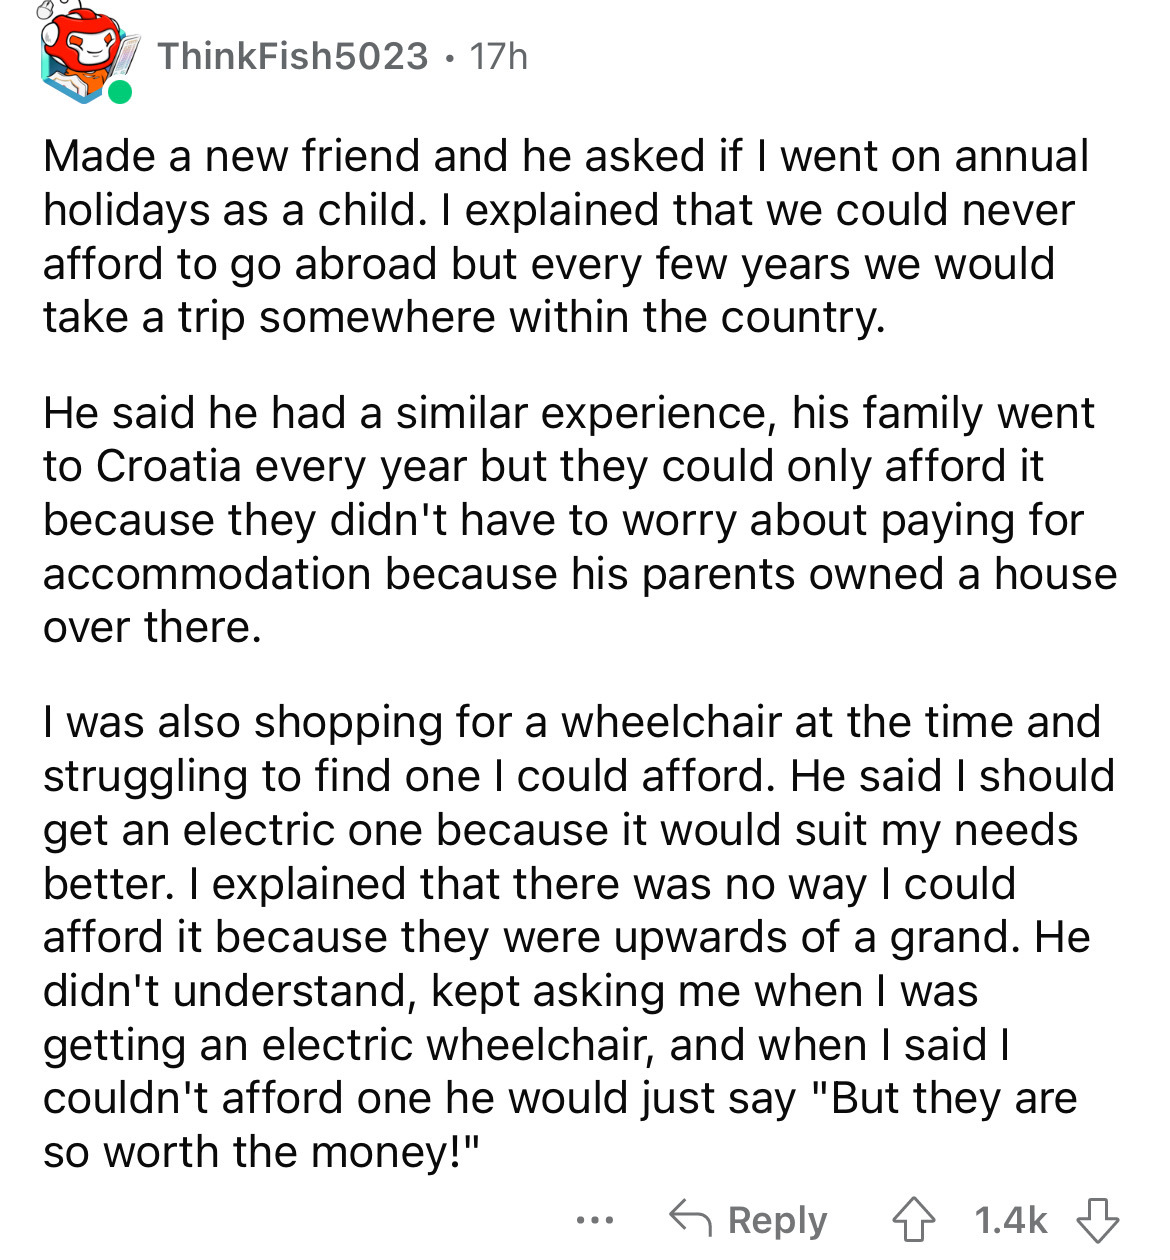 document - ThinkFish5023 17h Made a new friend and he asked if I went on annual holidays as a child. I explained that we could never afford to go abroad but every few years we would take a trip somewhere within the country. He said he had a similar experi